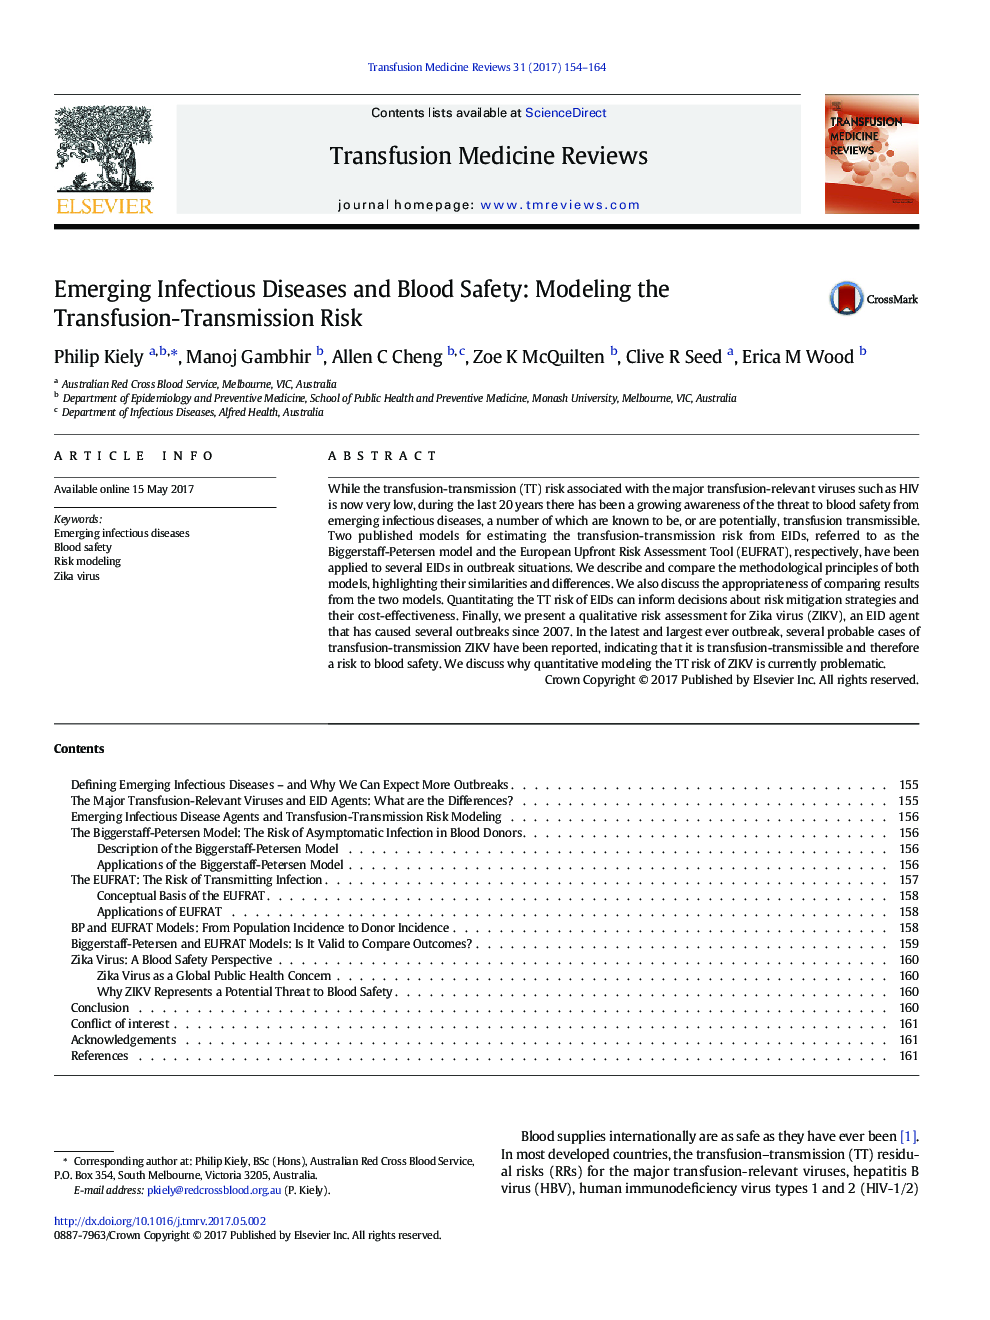 Emerging Infectious Diseases and Blood Safety: Modeling the Transfusion-Transmission Risk